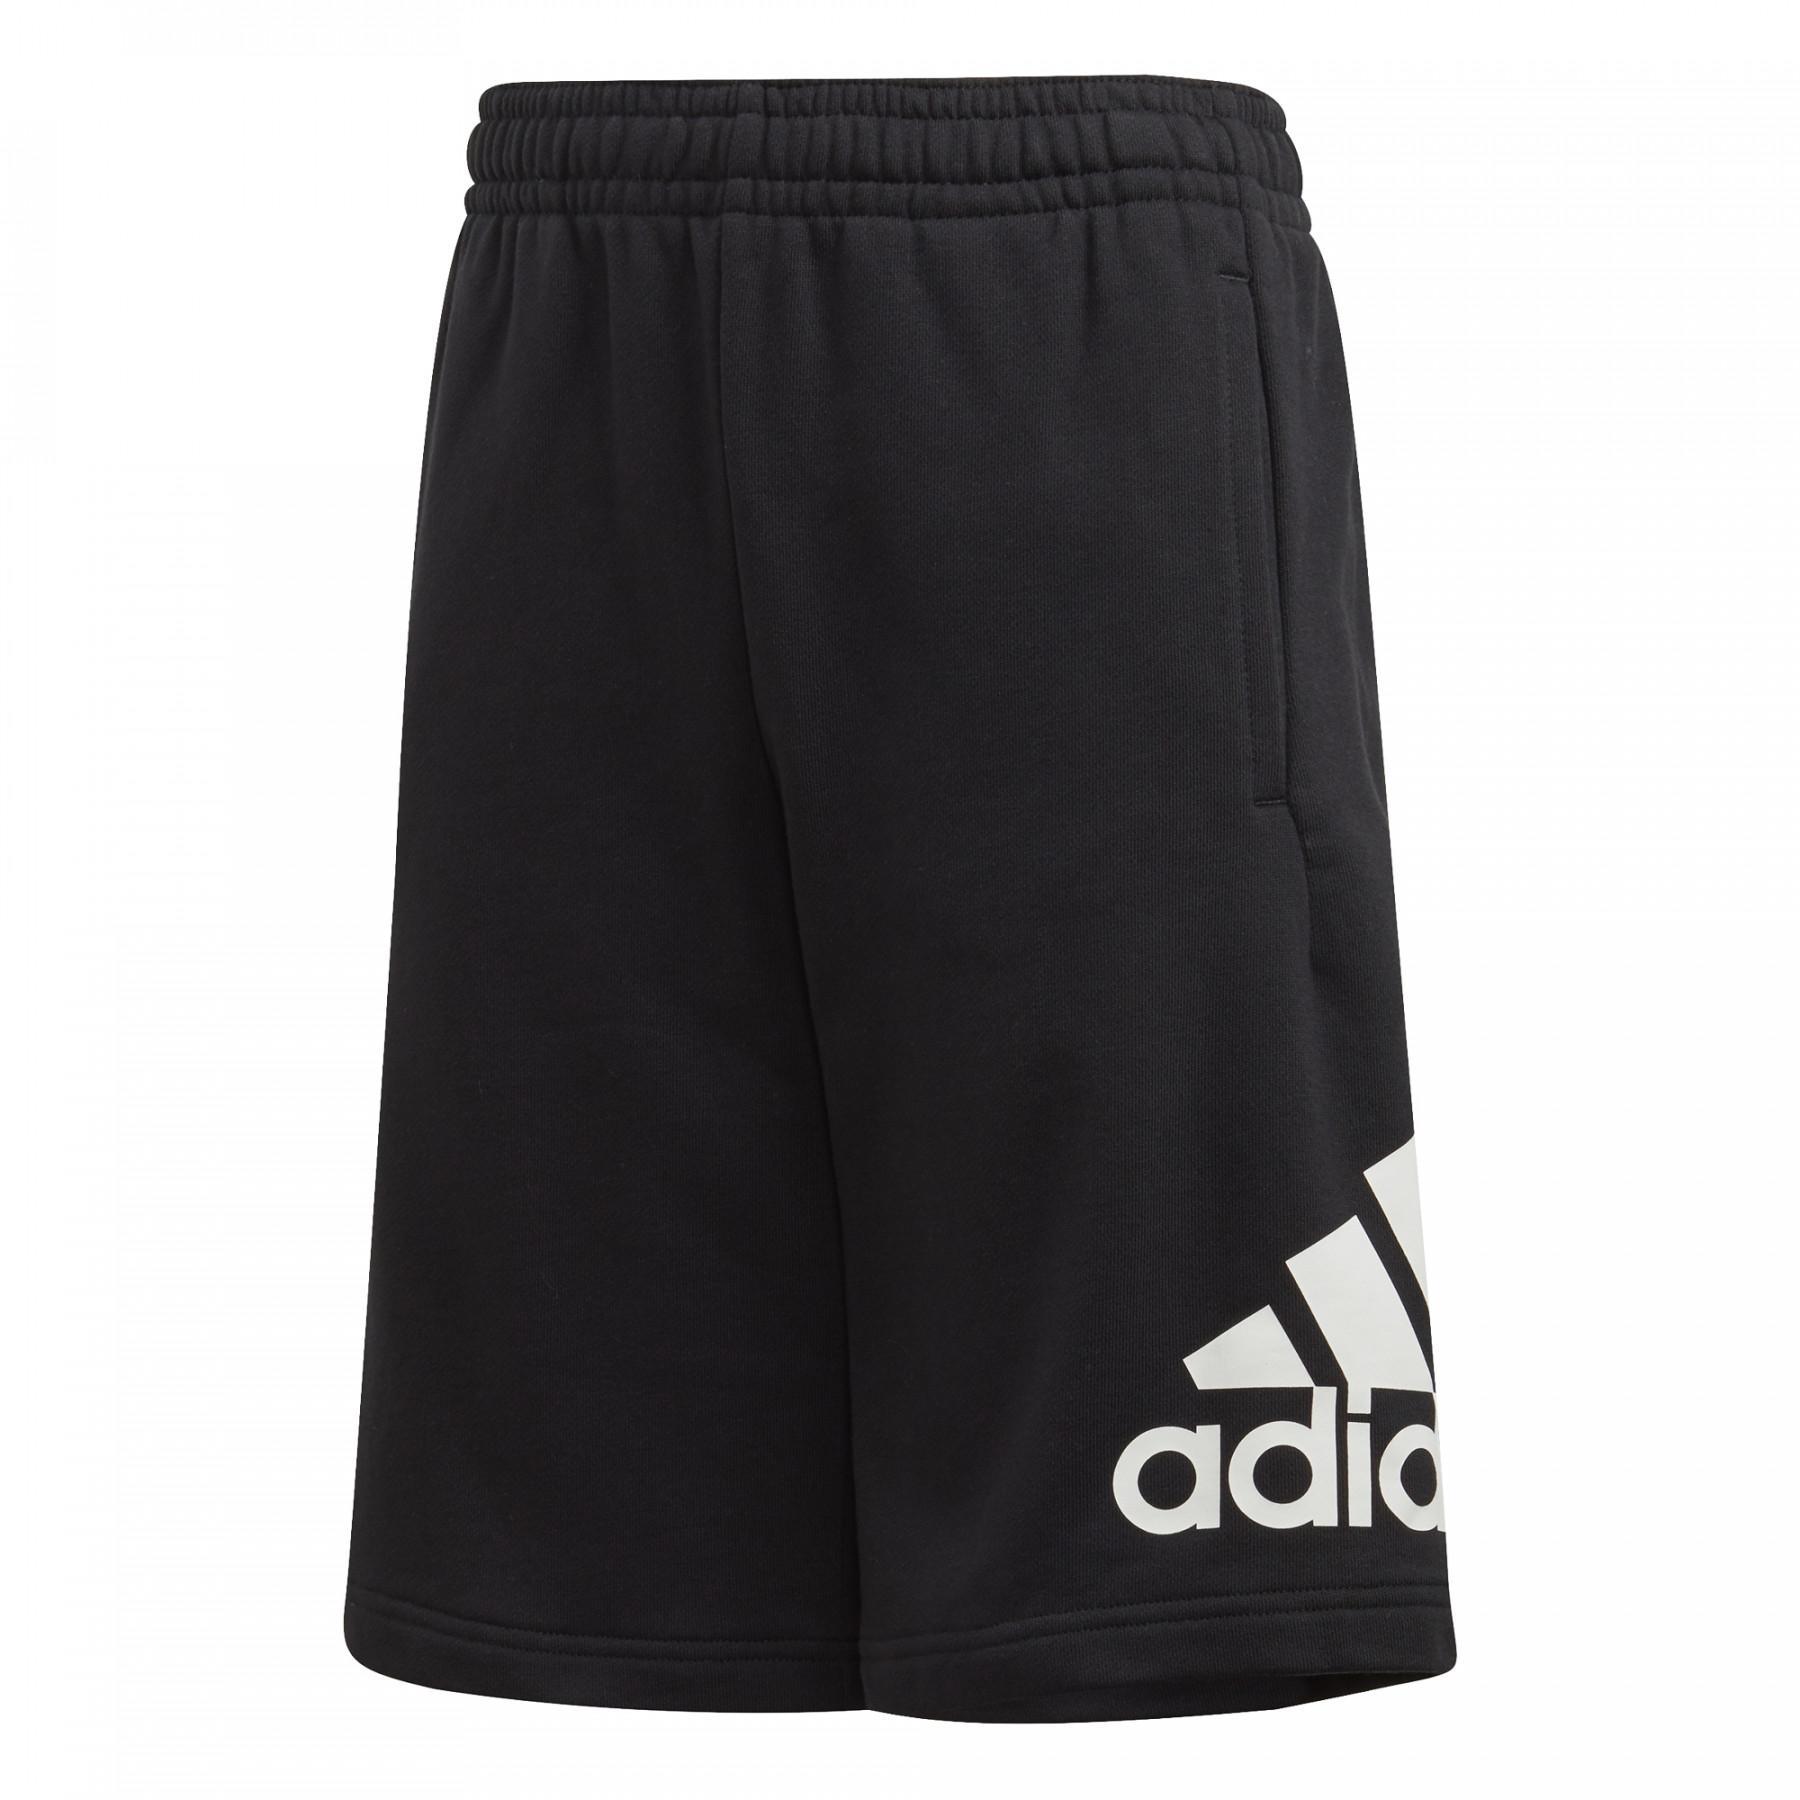 Children's shorts adidas Must Haves Badge ofport